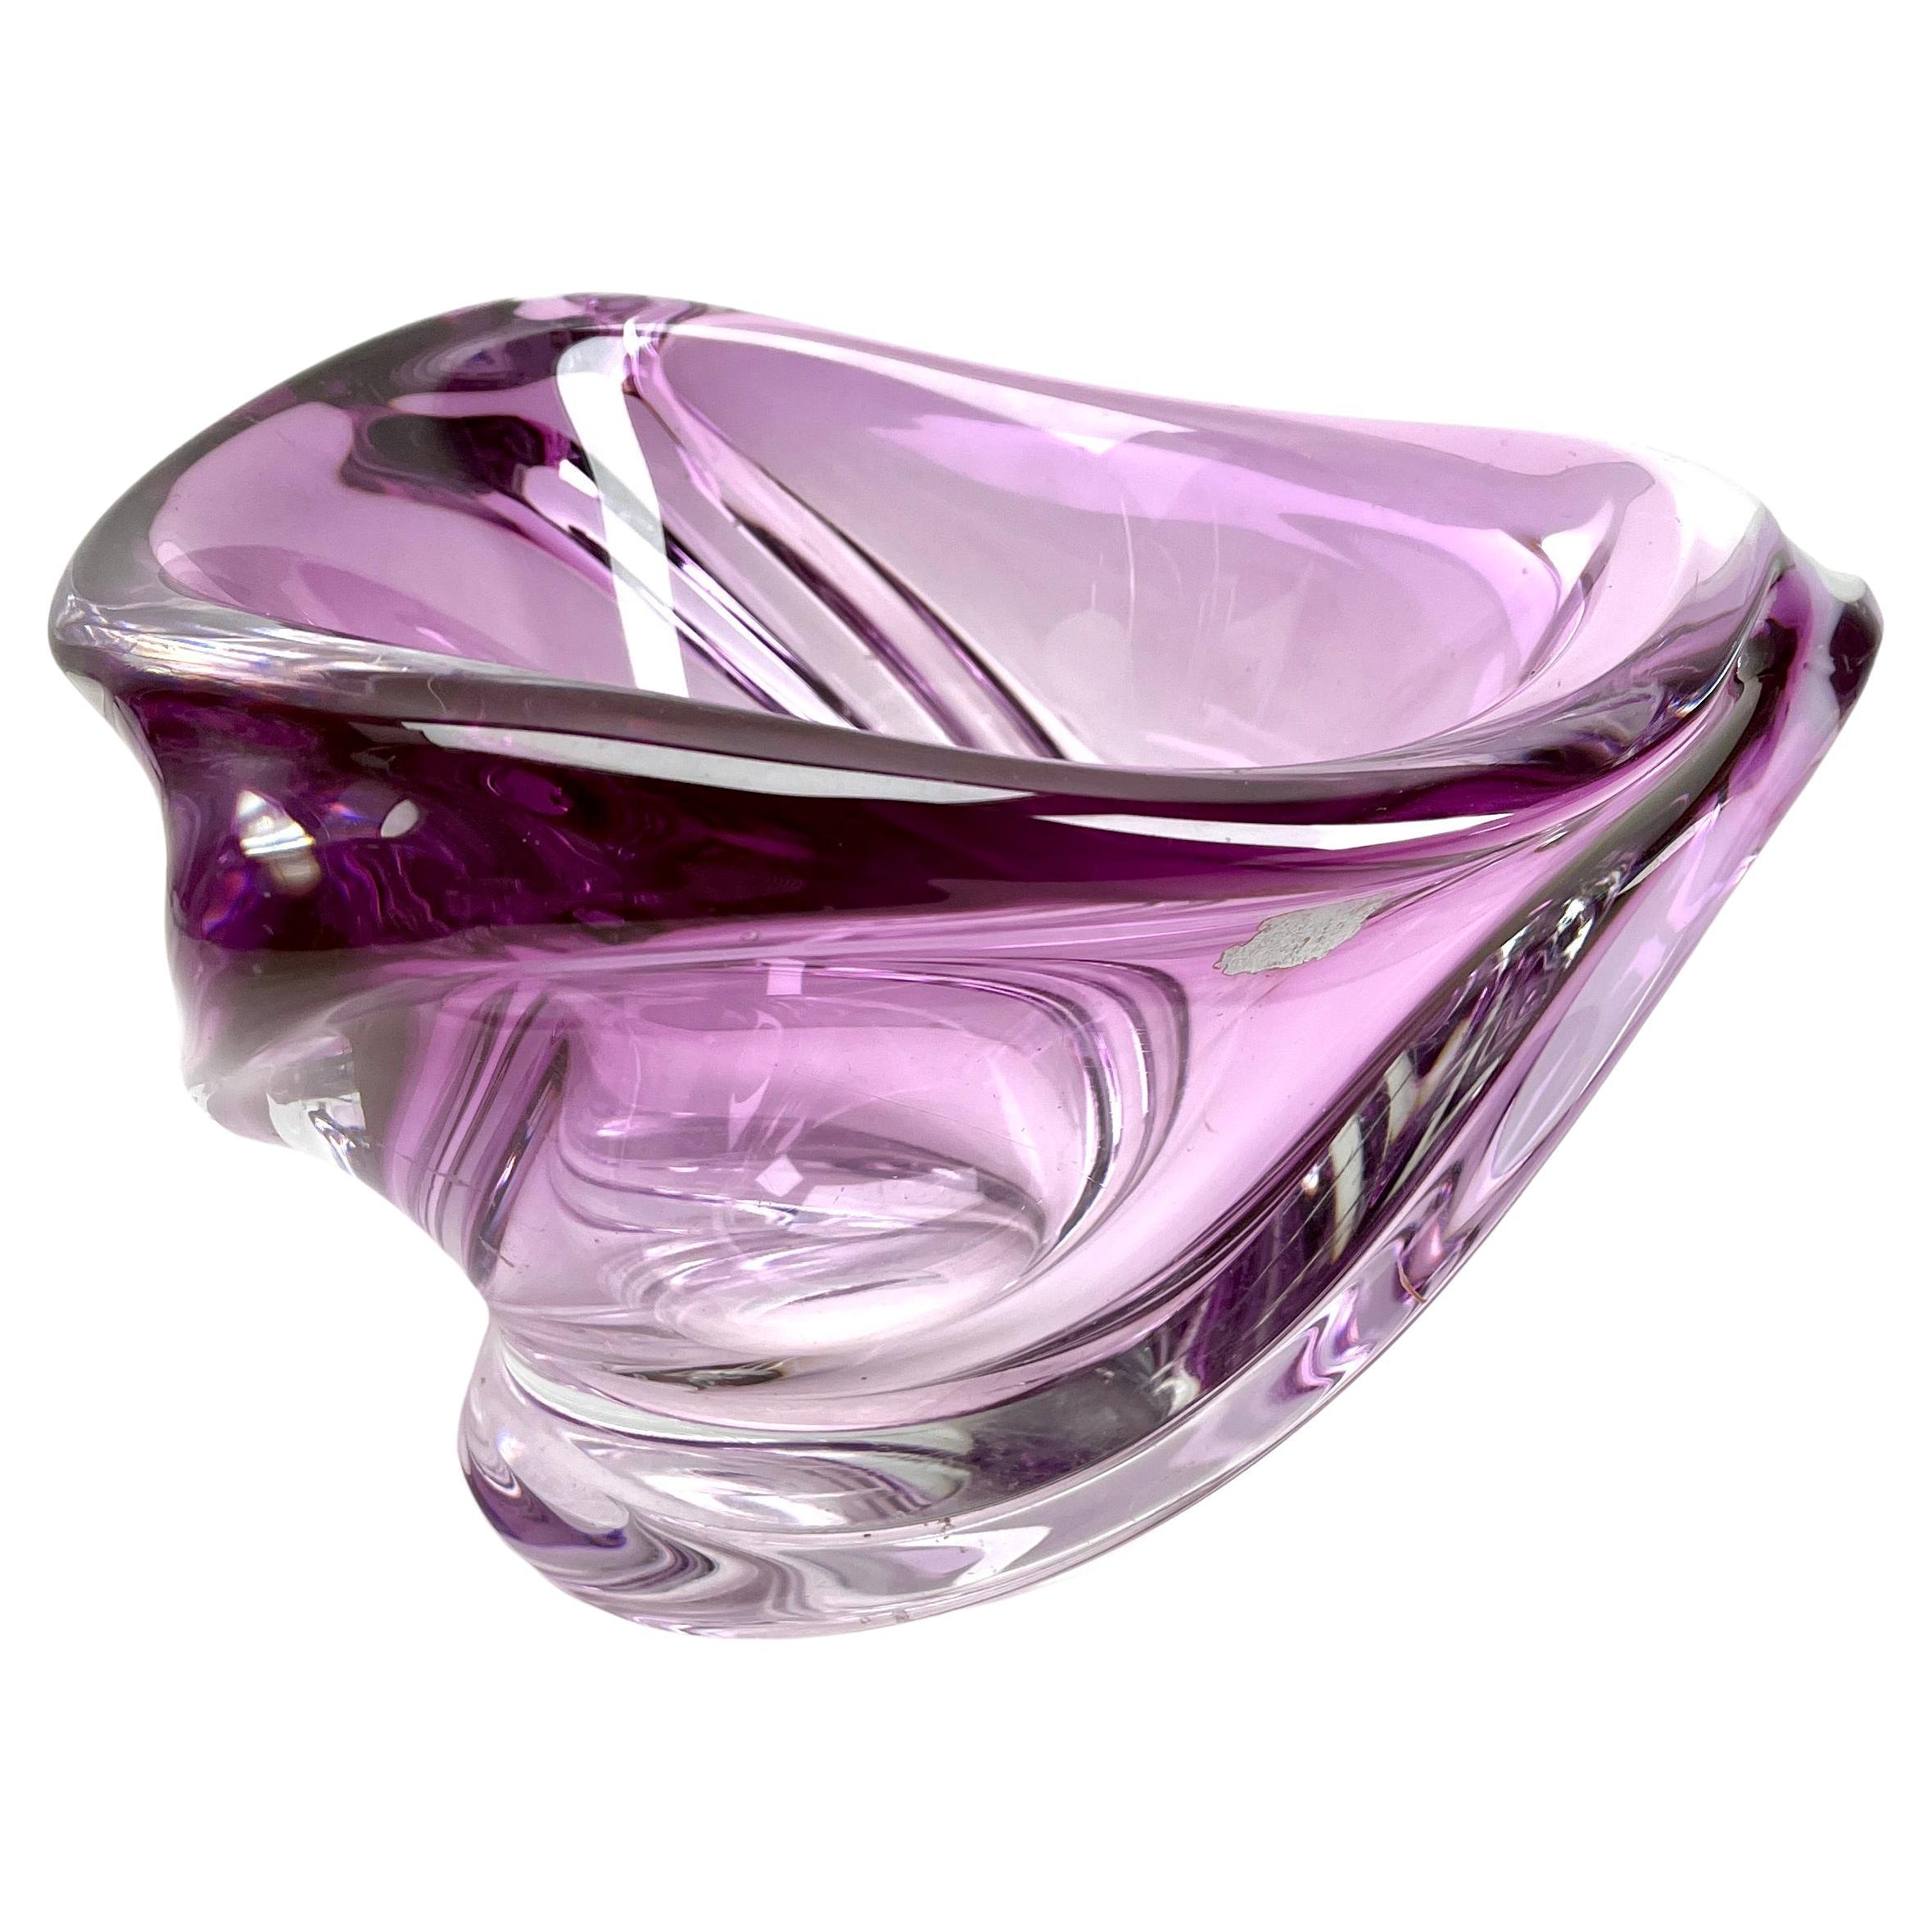 Belgian Val Saint Lambert Signed Sculpted Crystal Vase with Sommerso Core, Belgium For Sale